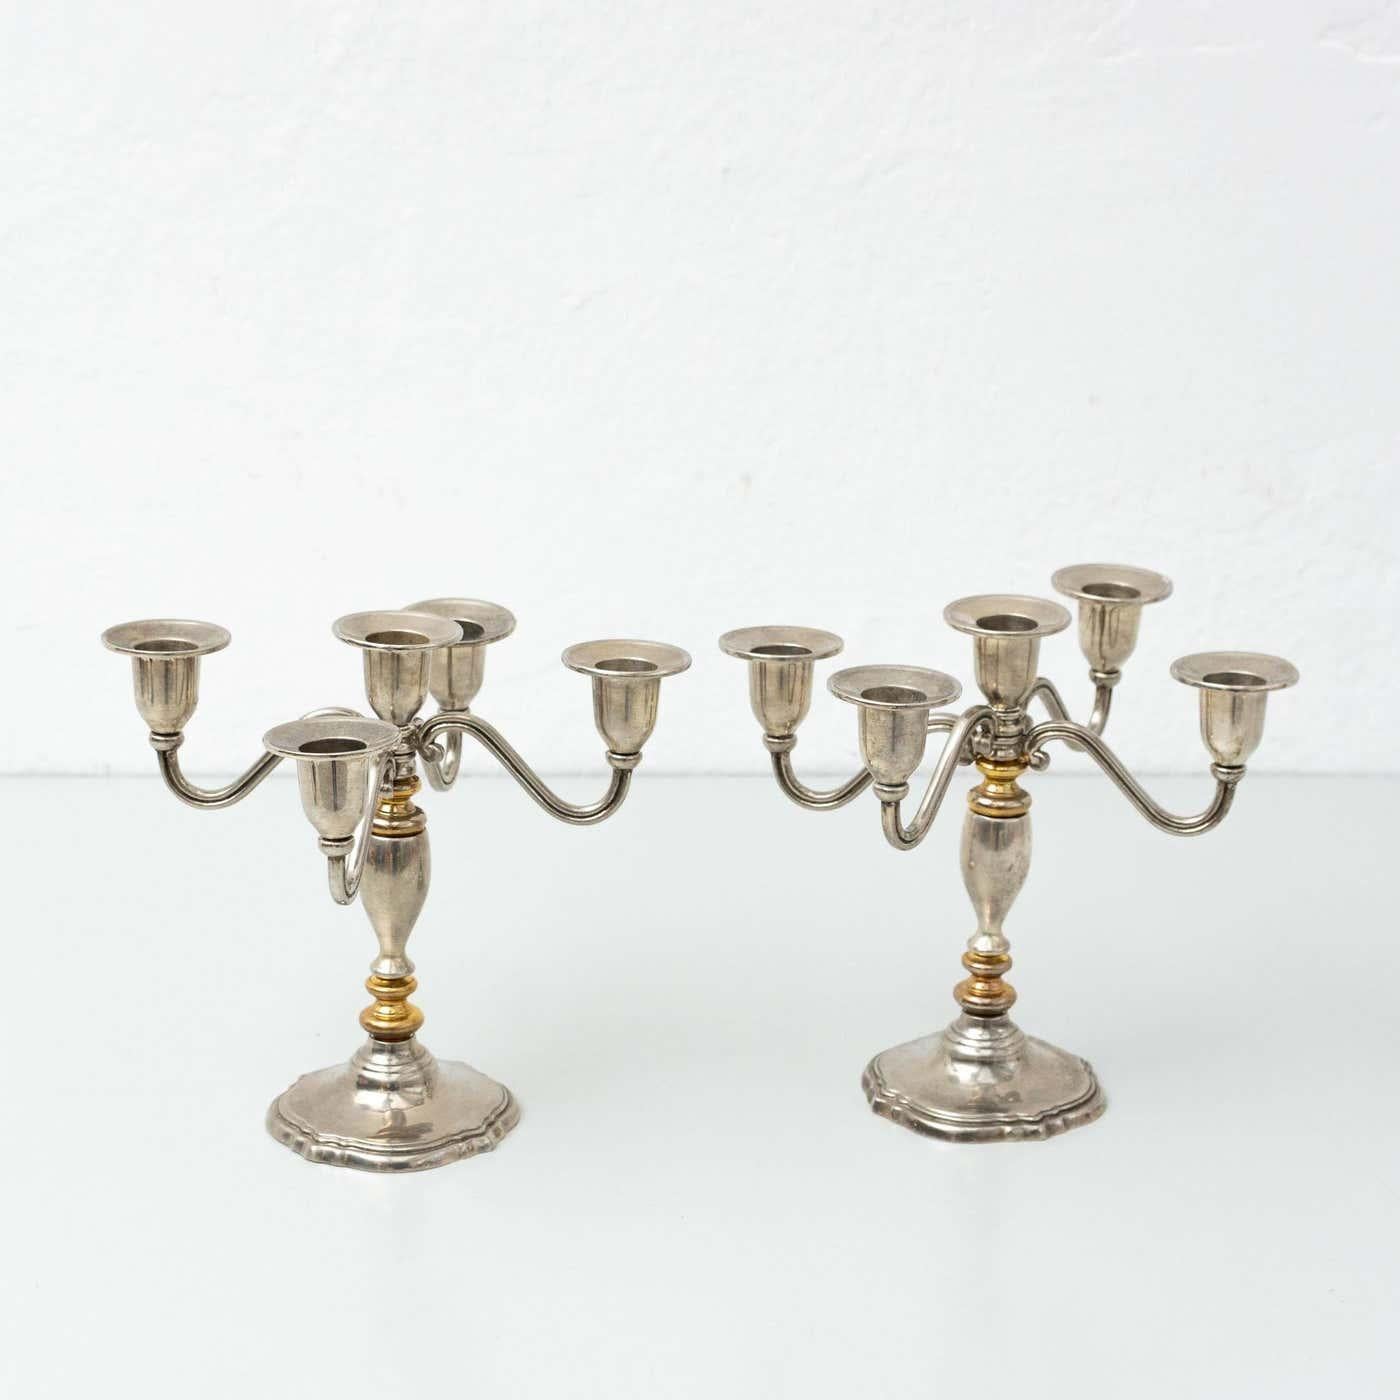 Set of two antique candlestick.
By unknown manufacturer from France, circa 1950.

In original condition, with minor wear consistent with age and use, preserving a beautiful patina.

Materials:
Metal

Dimensions (each one):
D 22.2 cm x W 22.7 cm x H